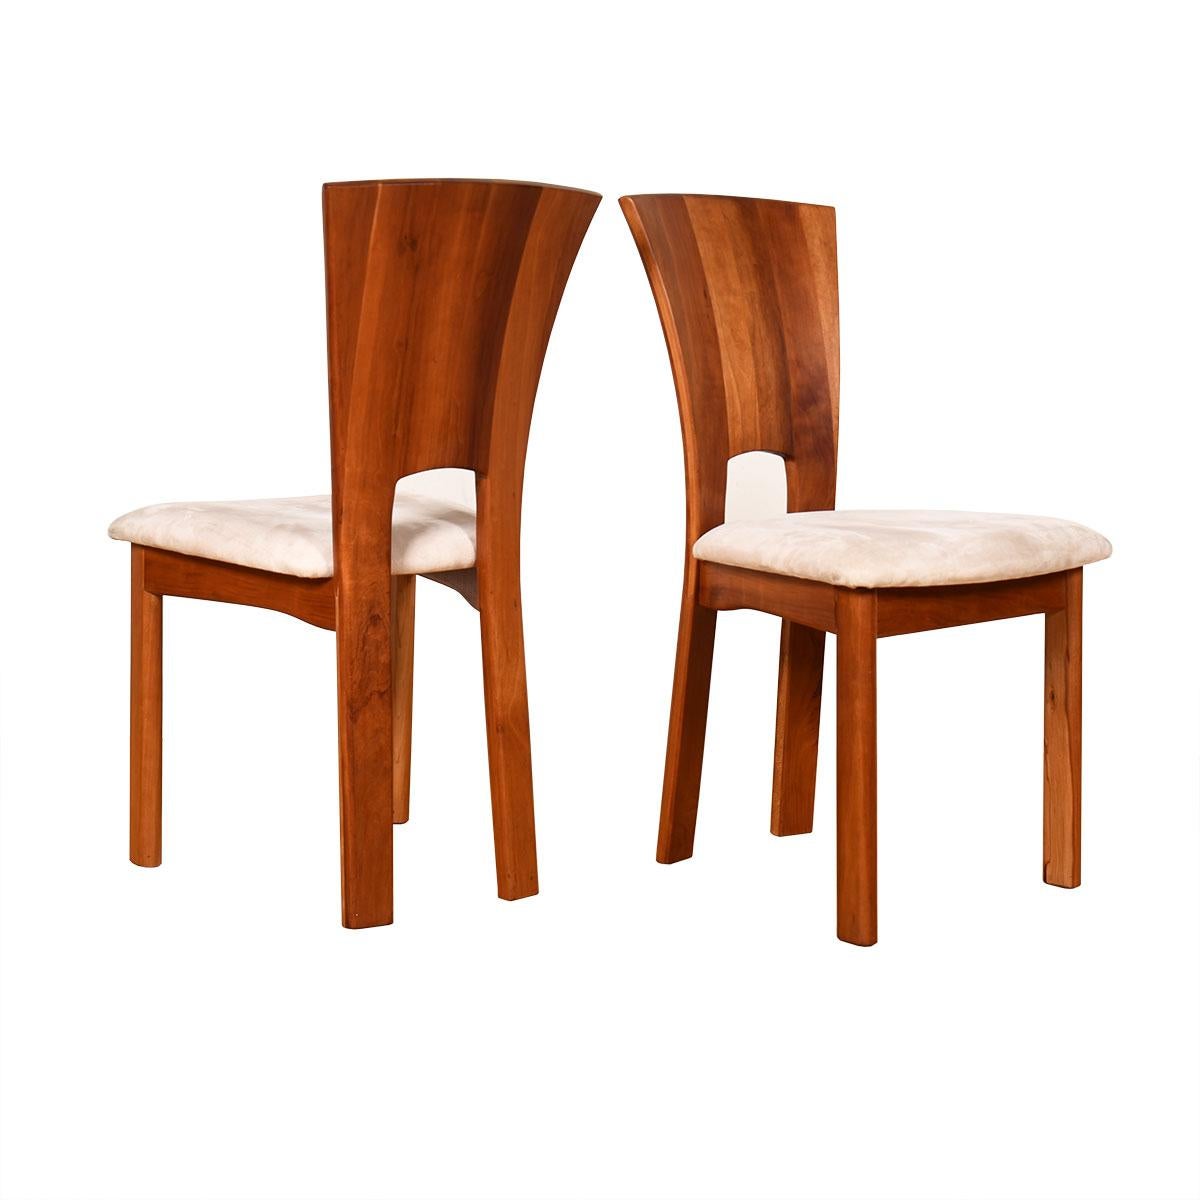 Pair of Sculpted Solid Wood Tallback Accent Chairs in Ultra-Suede

Additional information:
Material: Wood
Featured at DC:
Graciously tapered backrest with cutout in the middle bottom to lighten the appearance.
Back also forms the gently curved